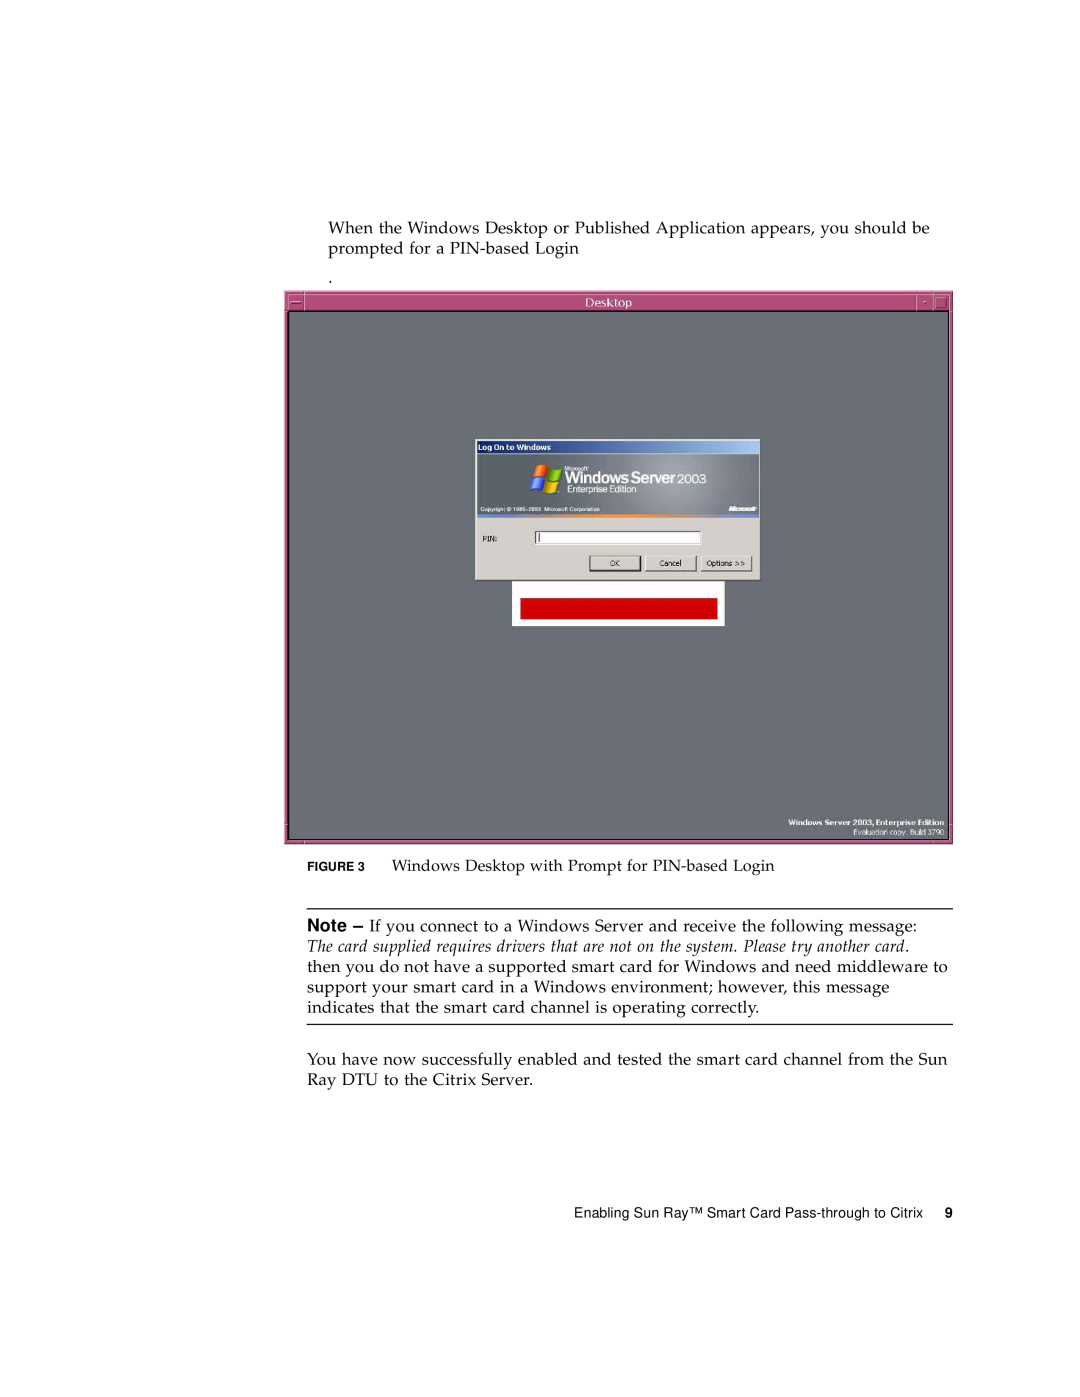 Sun Microsystems Smart Cards, and Citrix manual Windows Desktop with Prompt for PIN-based Login 